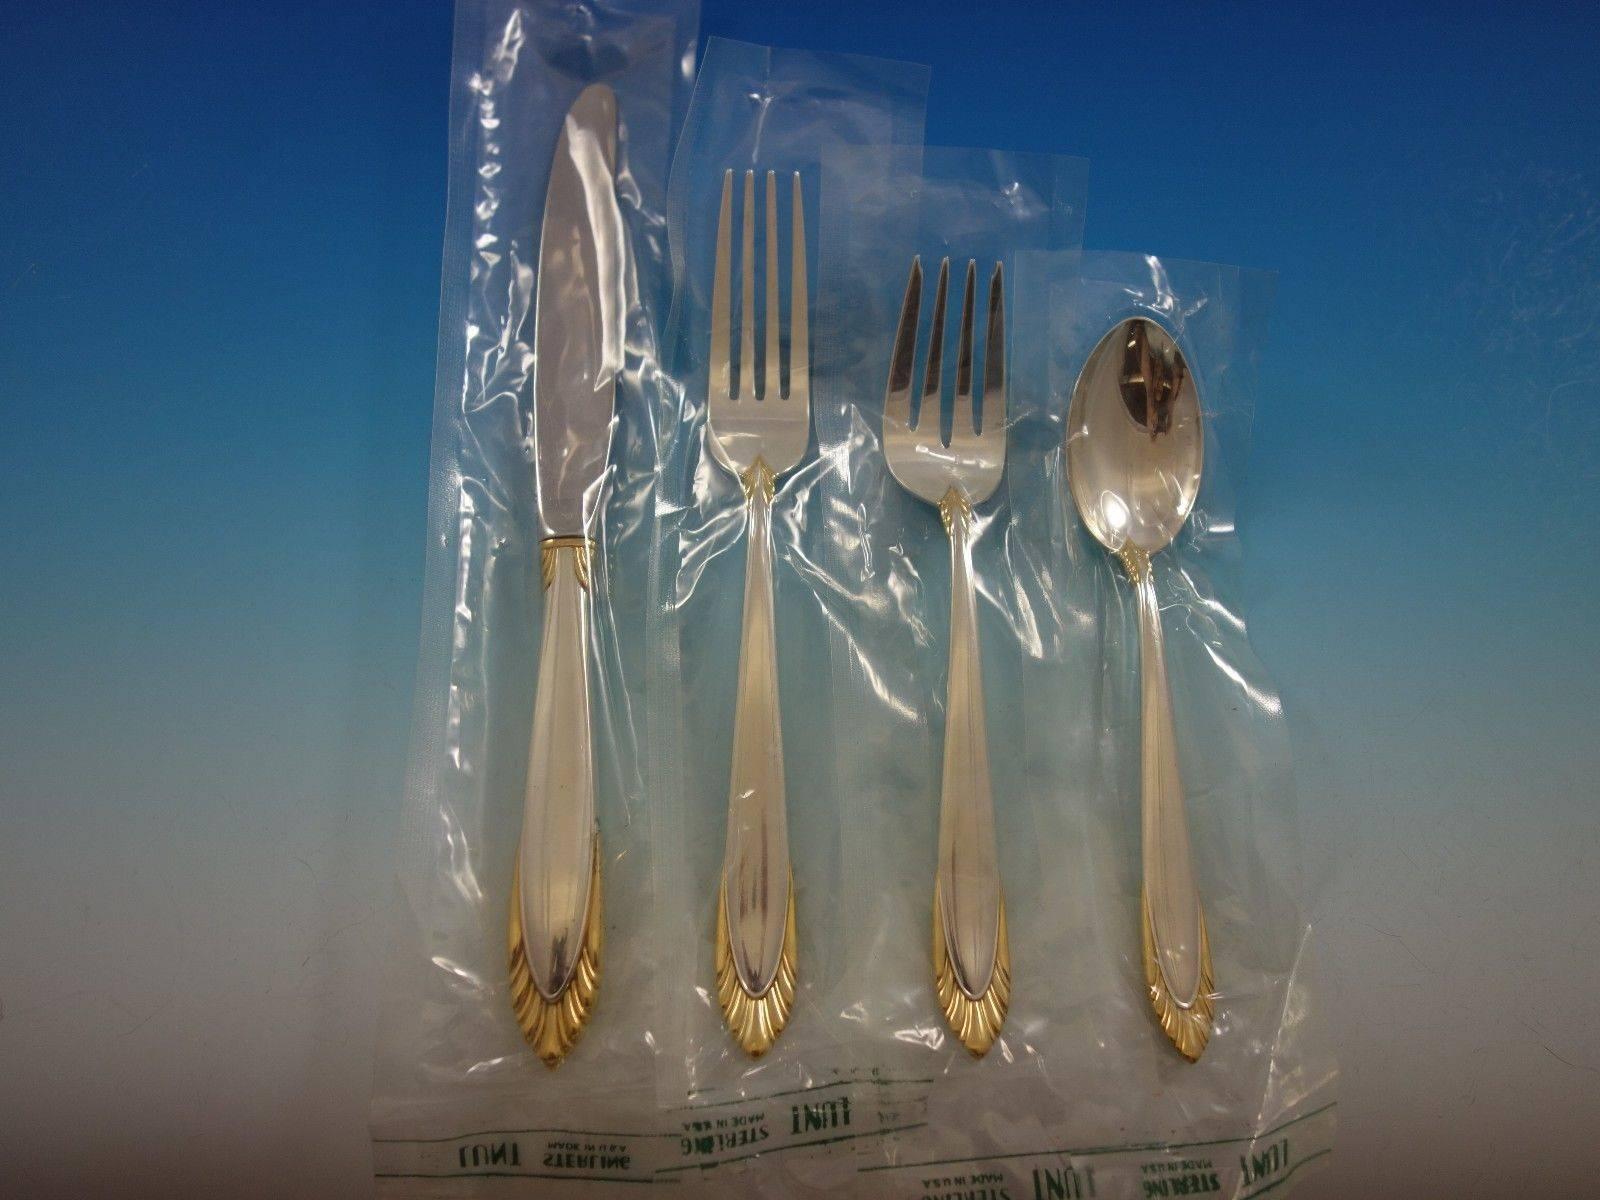 New Soliel Gold accent by Lunt sterling silver flatware set, 48 pieces. This set includes: 12 knives, 9 1/8